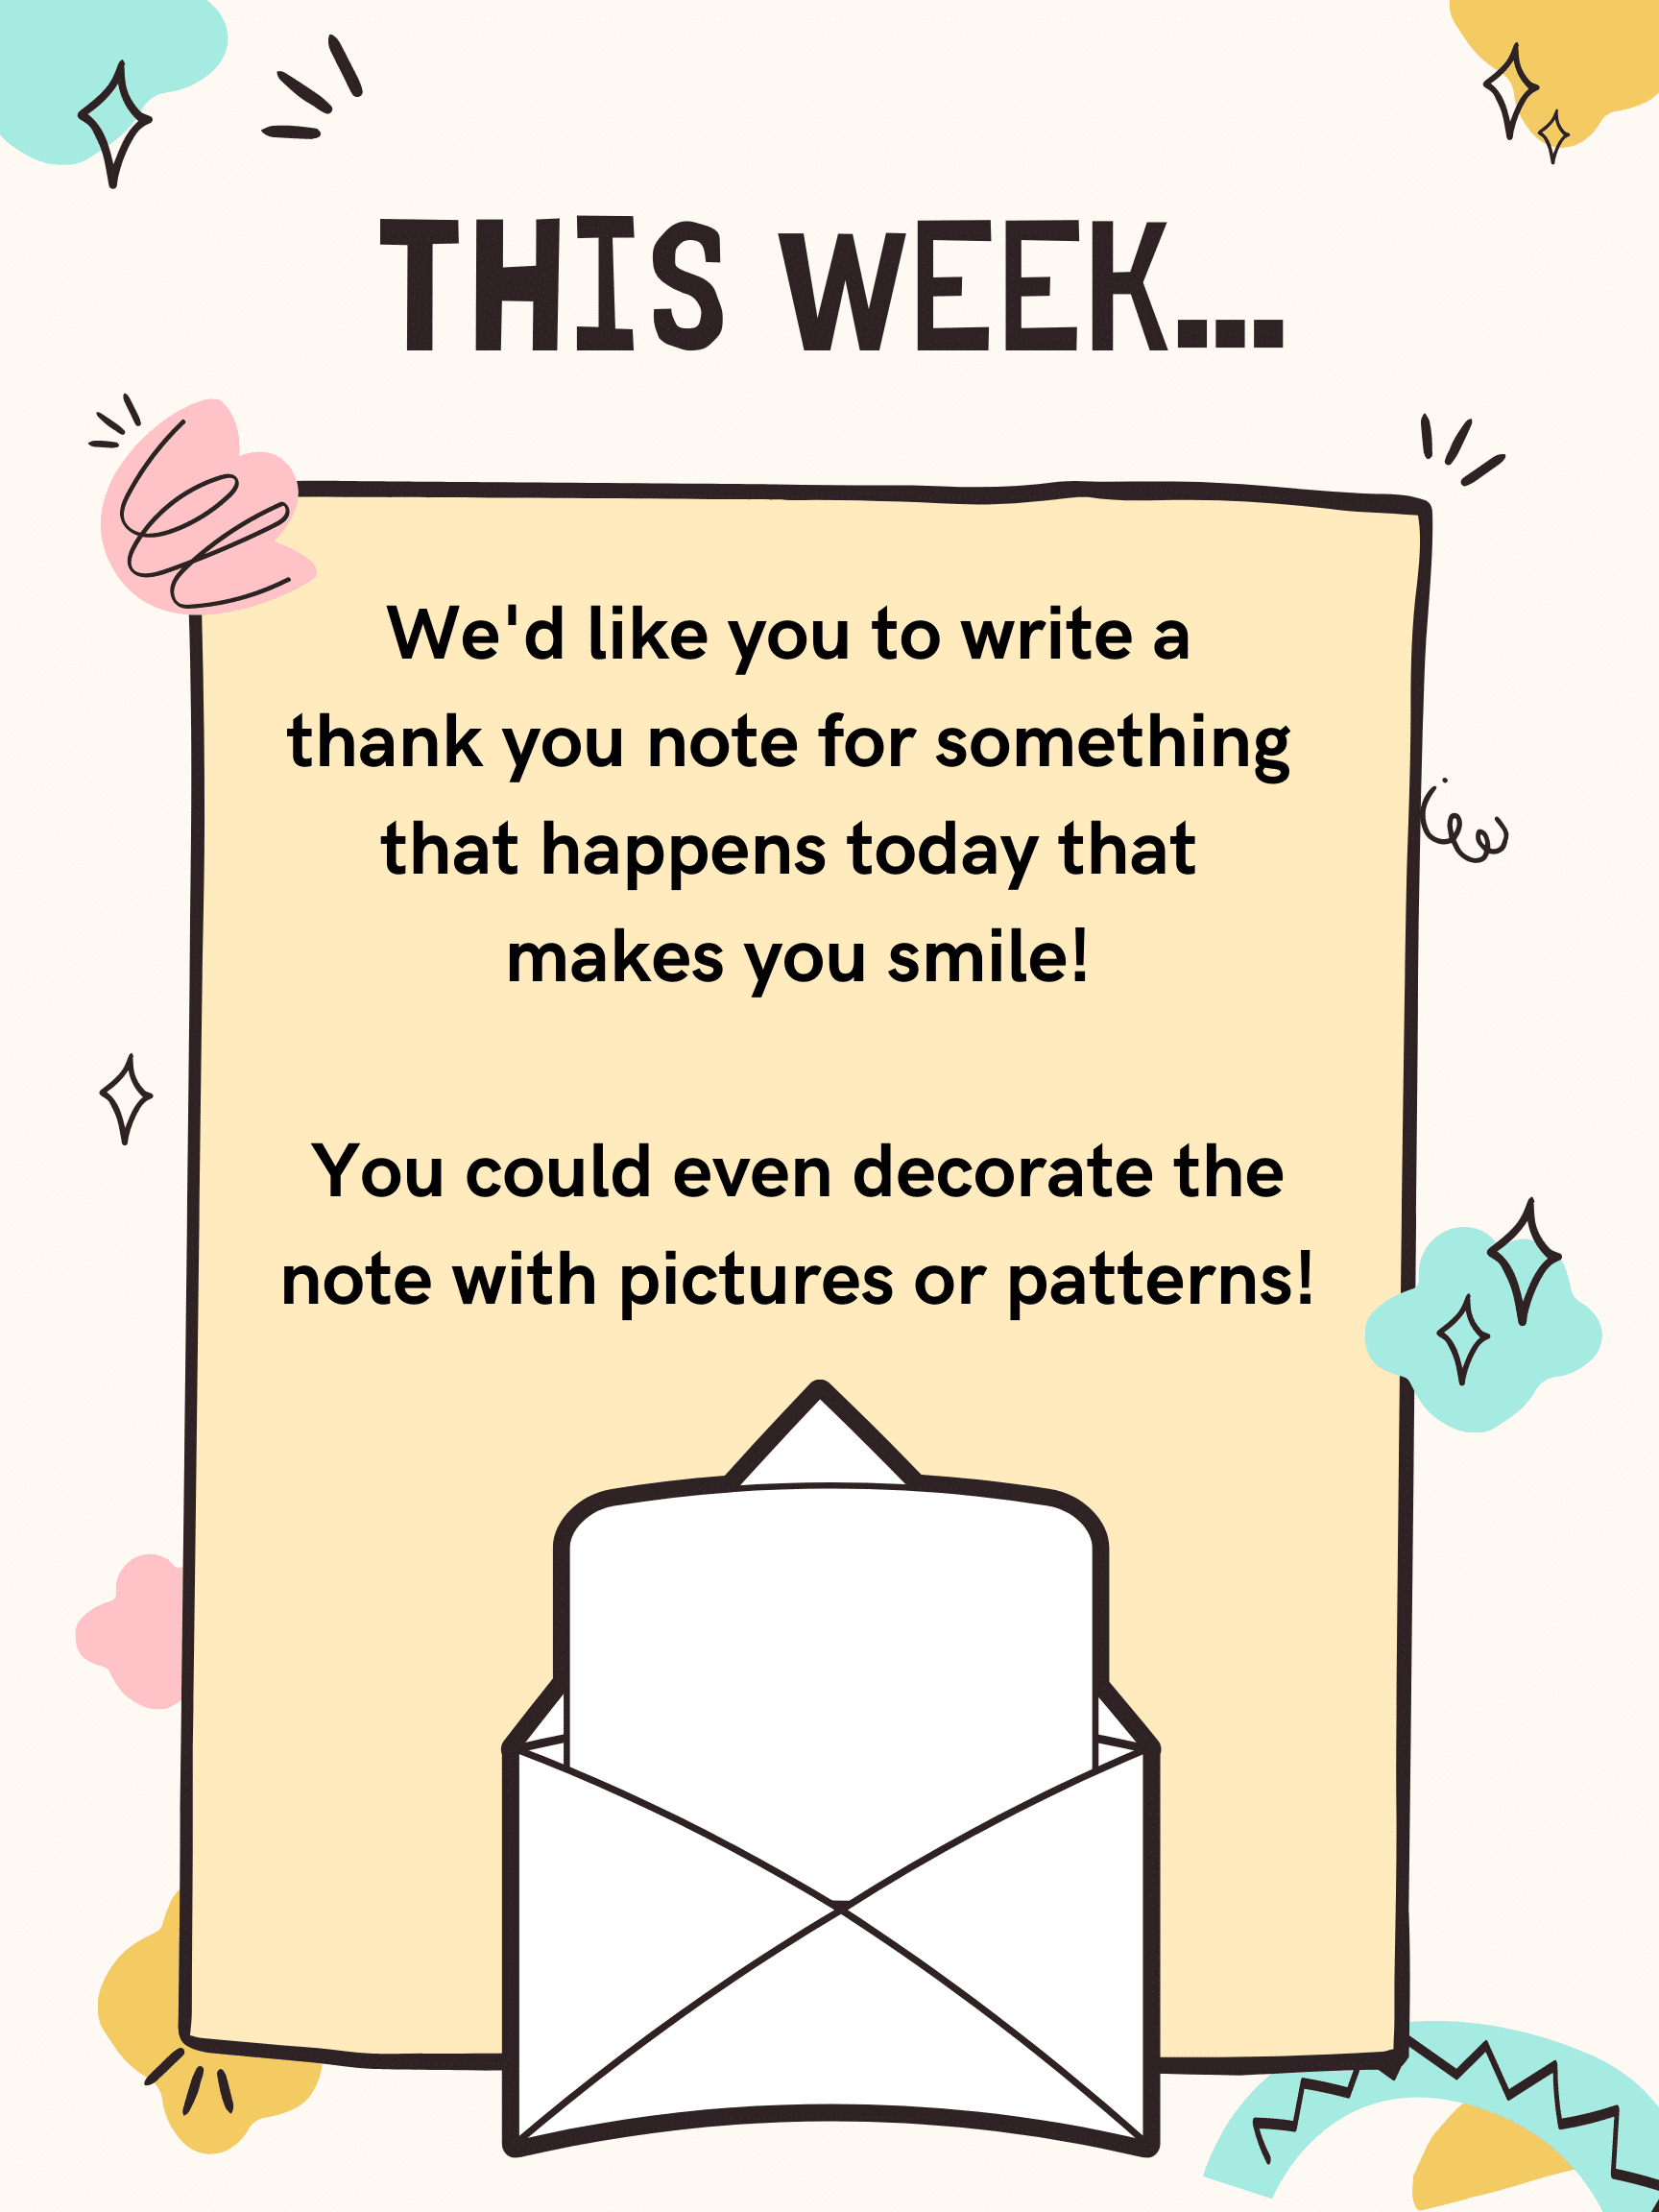 Thank you note weekly challenge